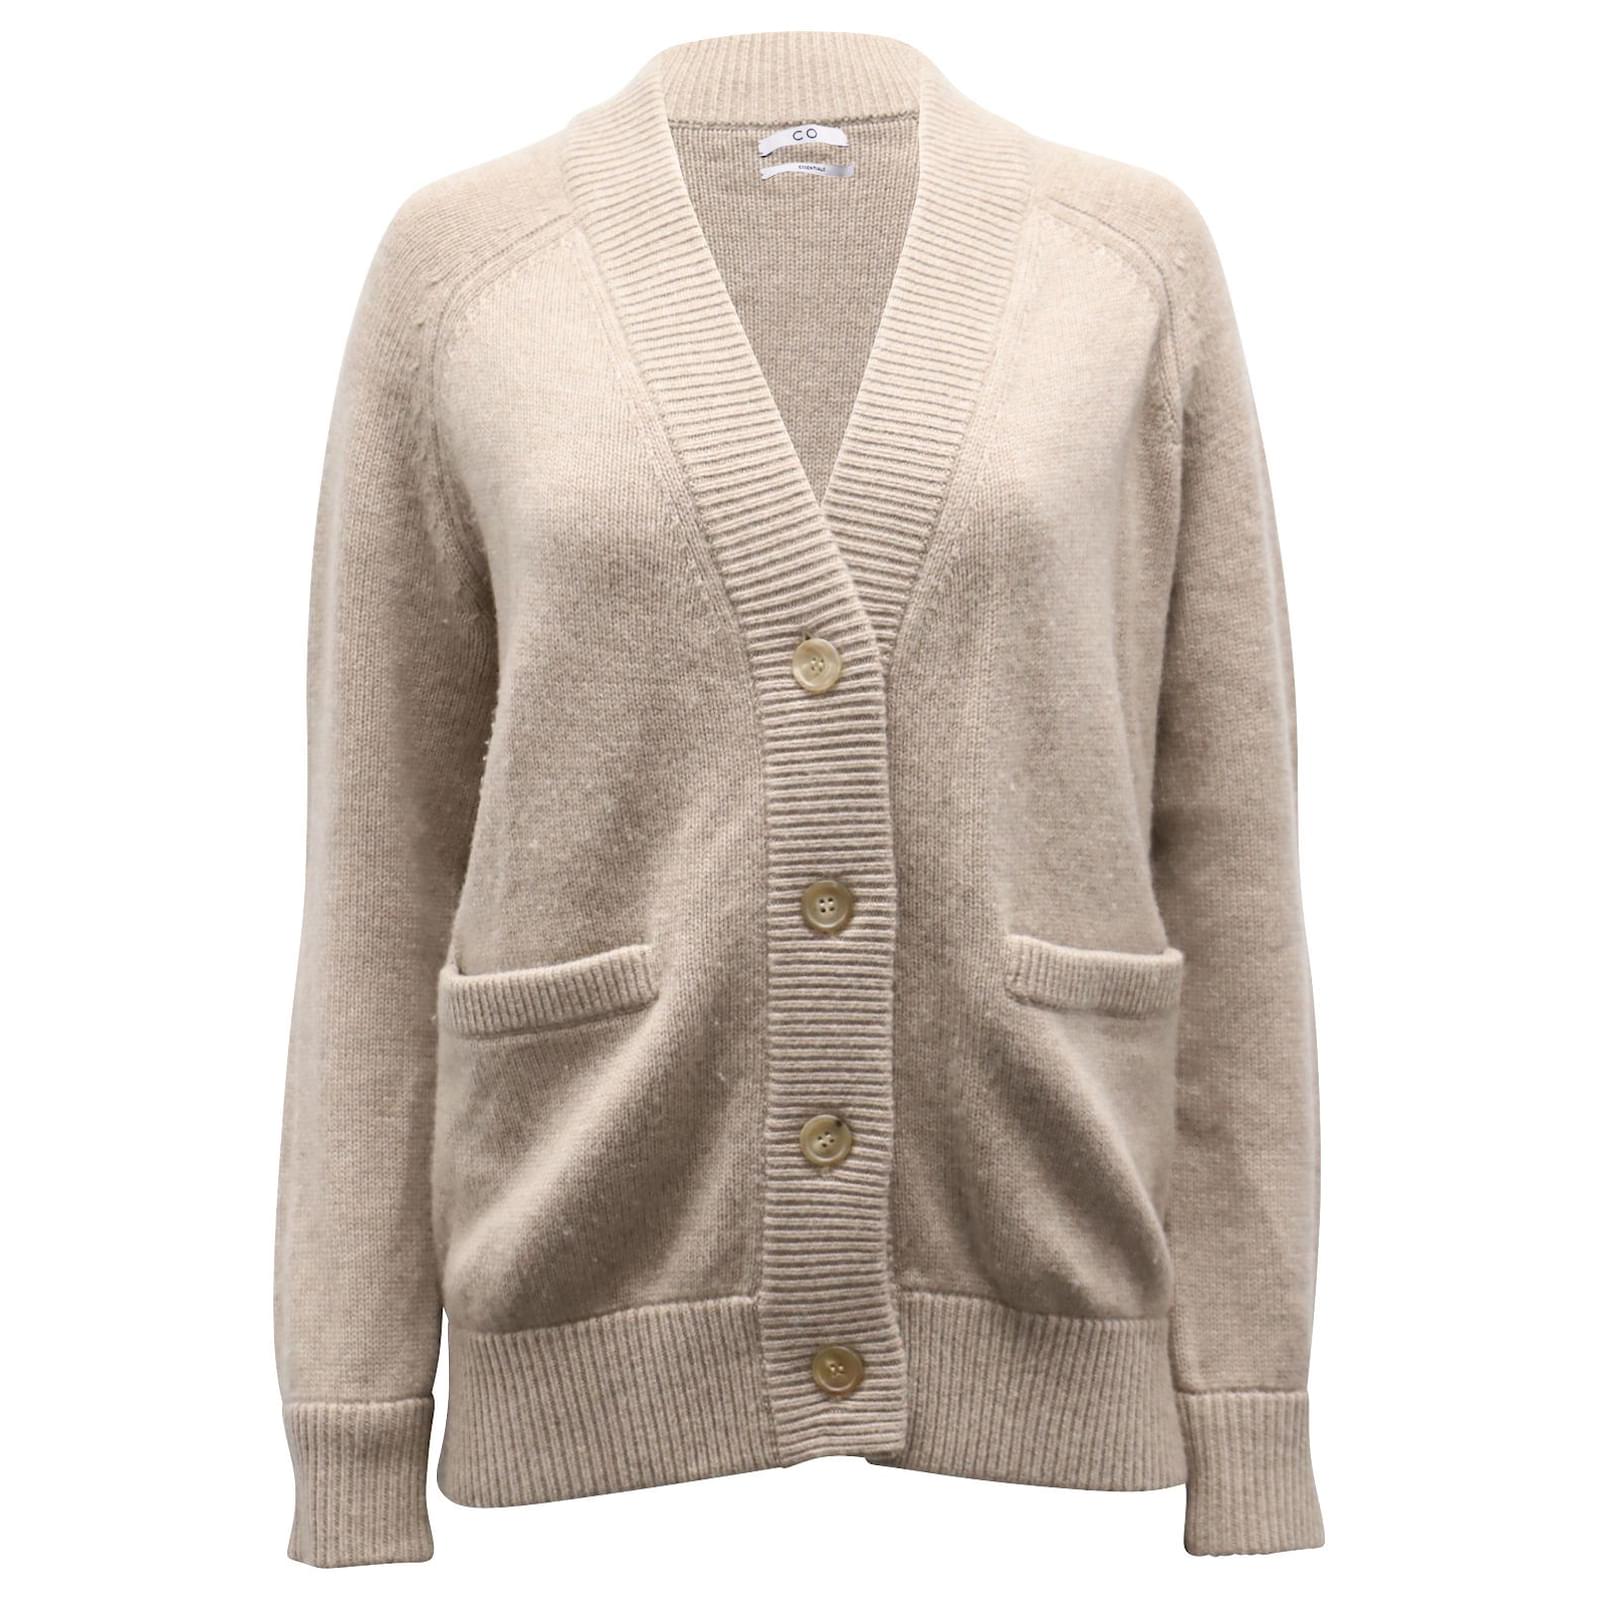 Tage af Relaterede Diverse Marc by Marc Jacobs Co V-neck Cardigan in Beige Wool and Cashmere  ref.753905 - Joli Closet